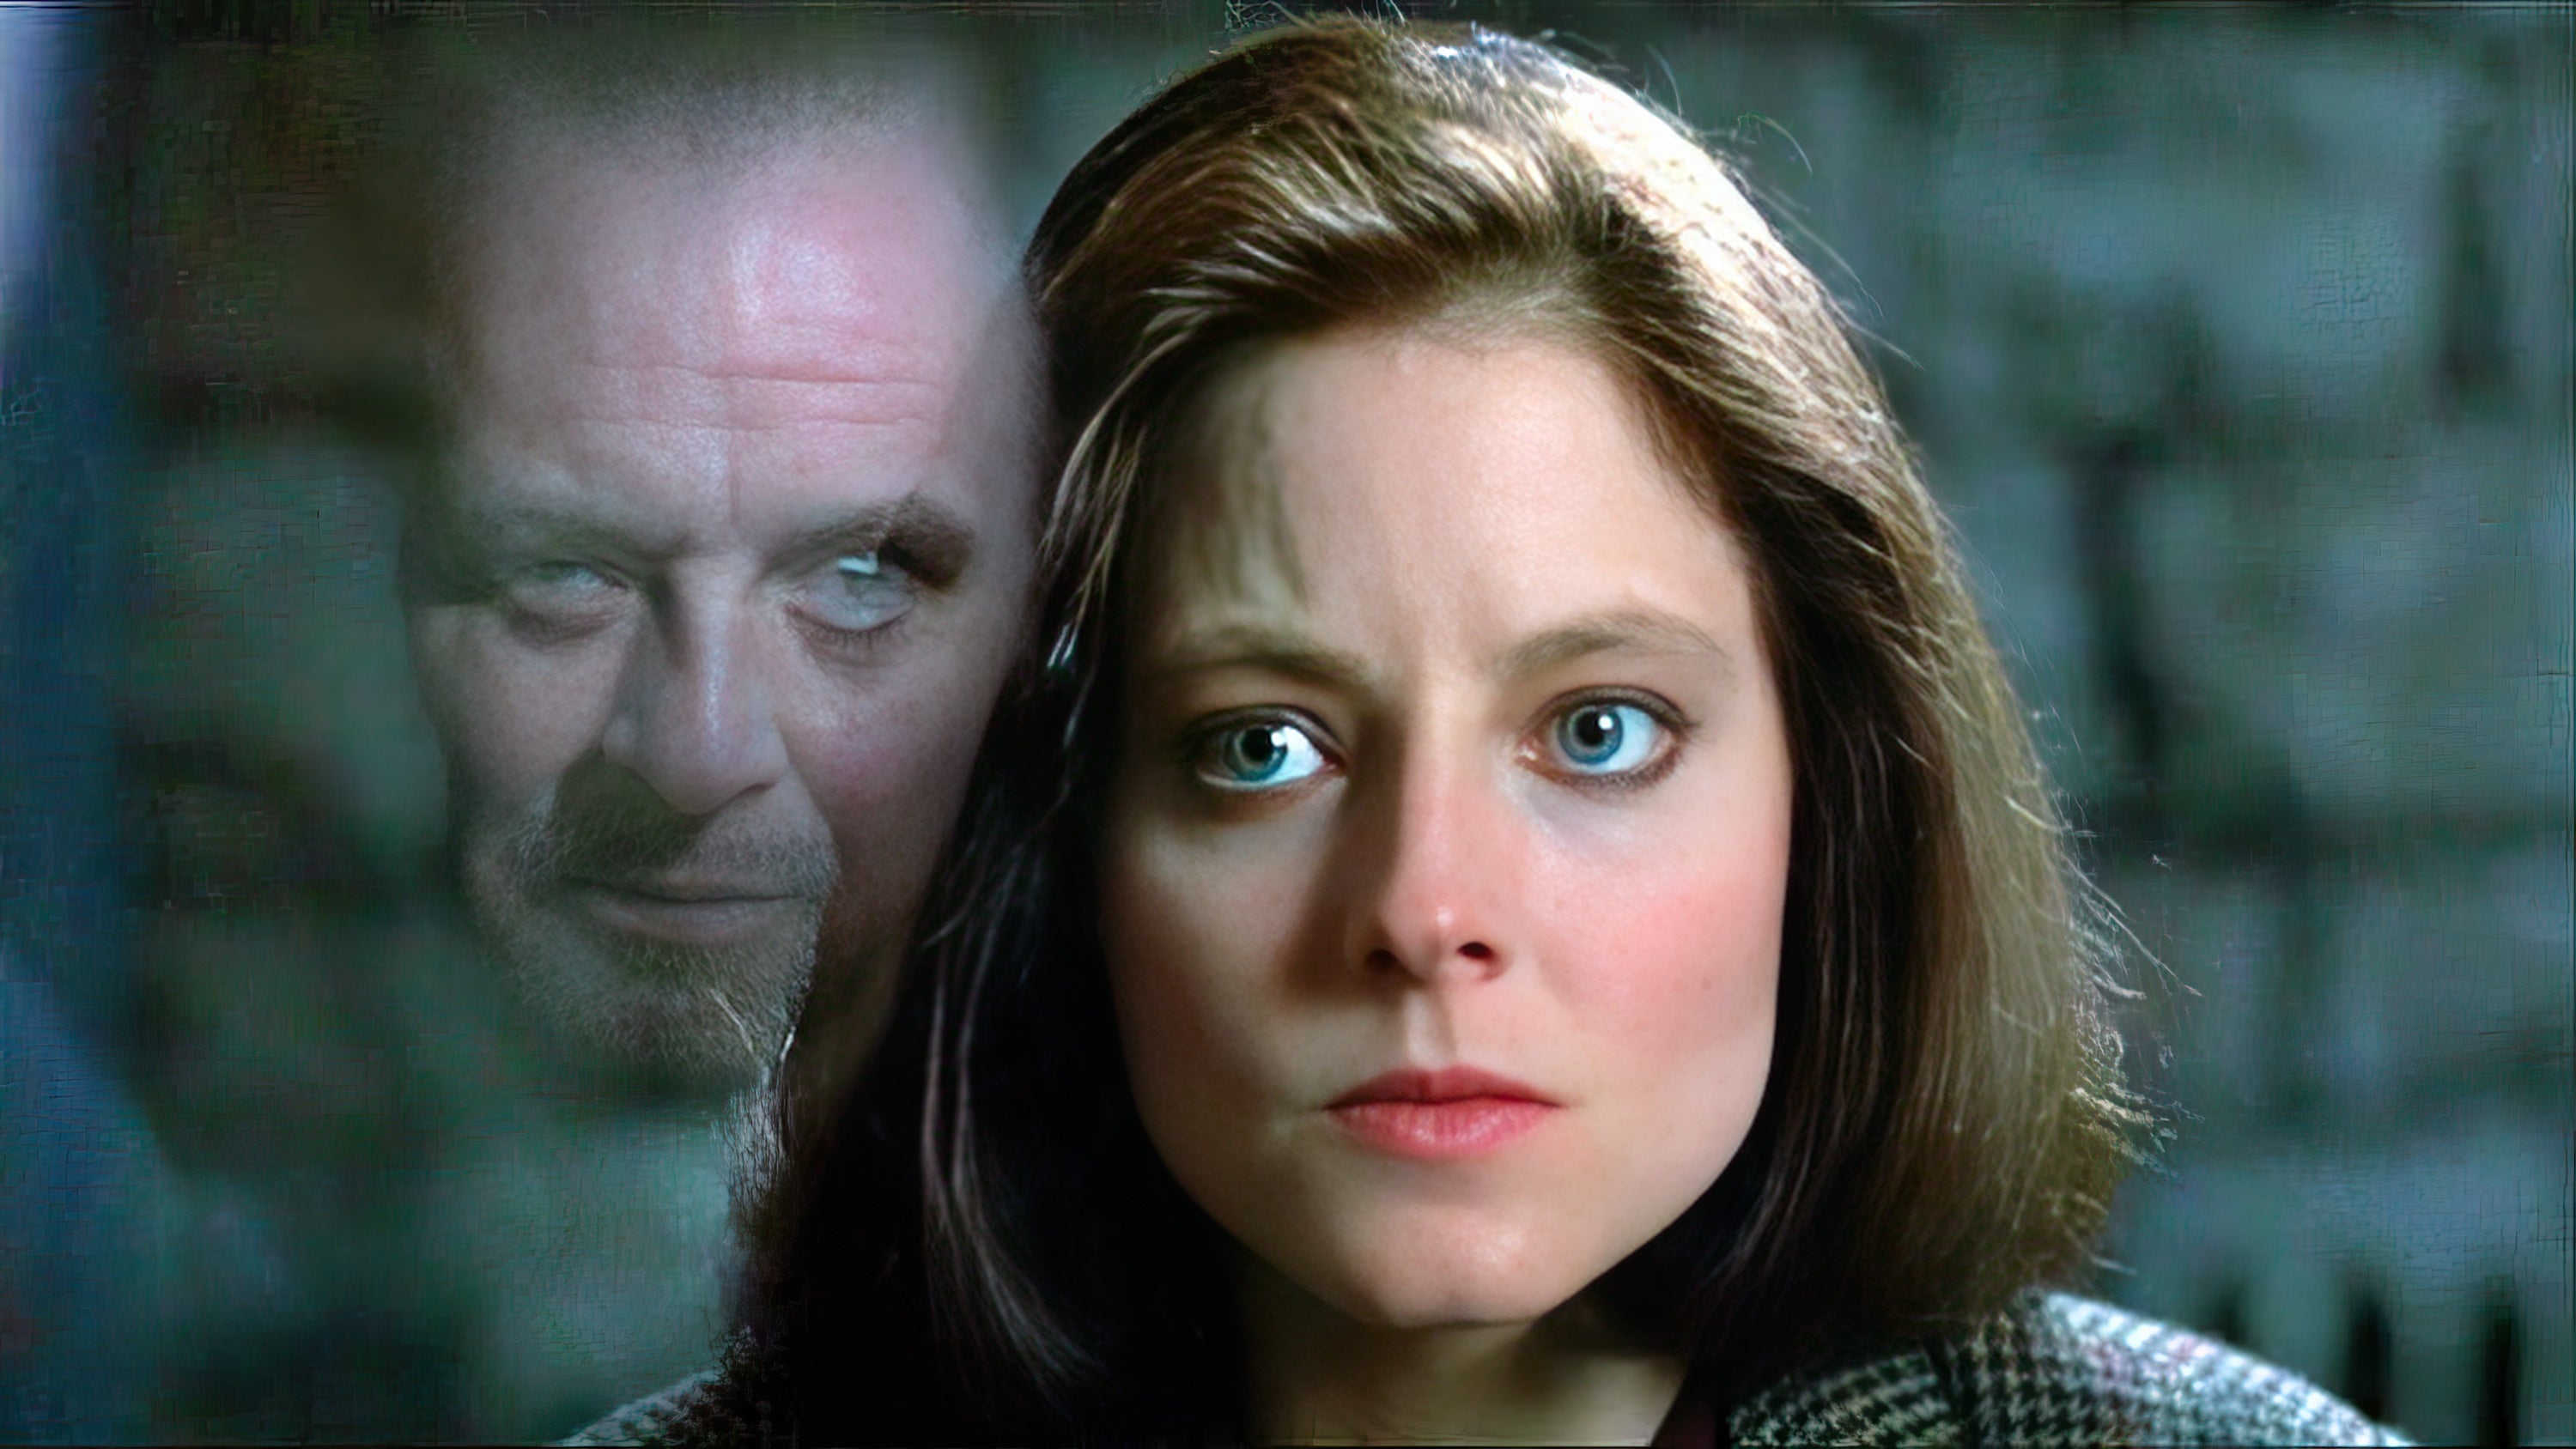 The Silence of the Lambs Script Screenplay - Image from the Movie